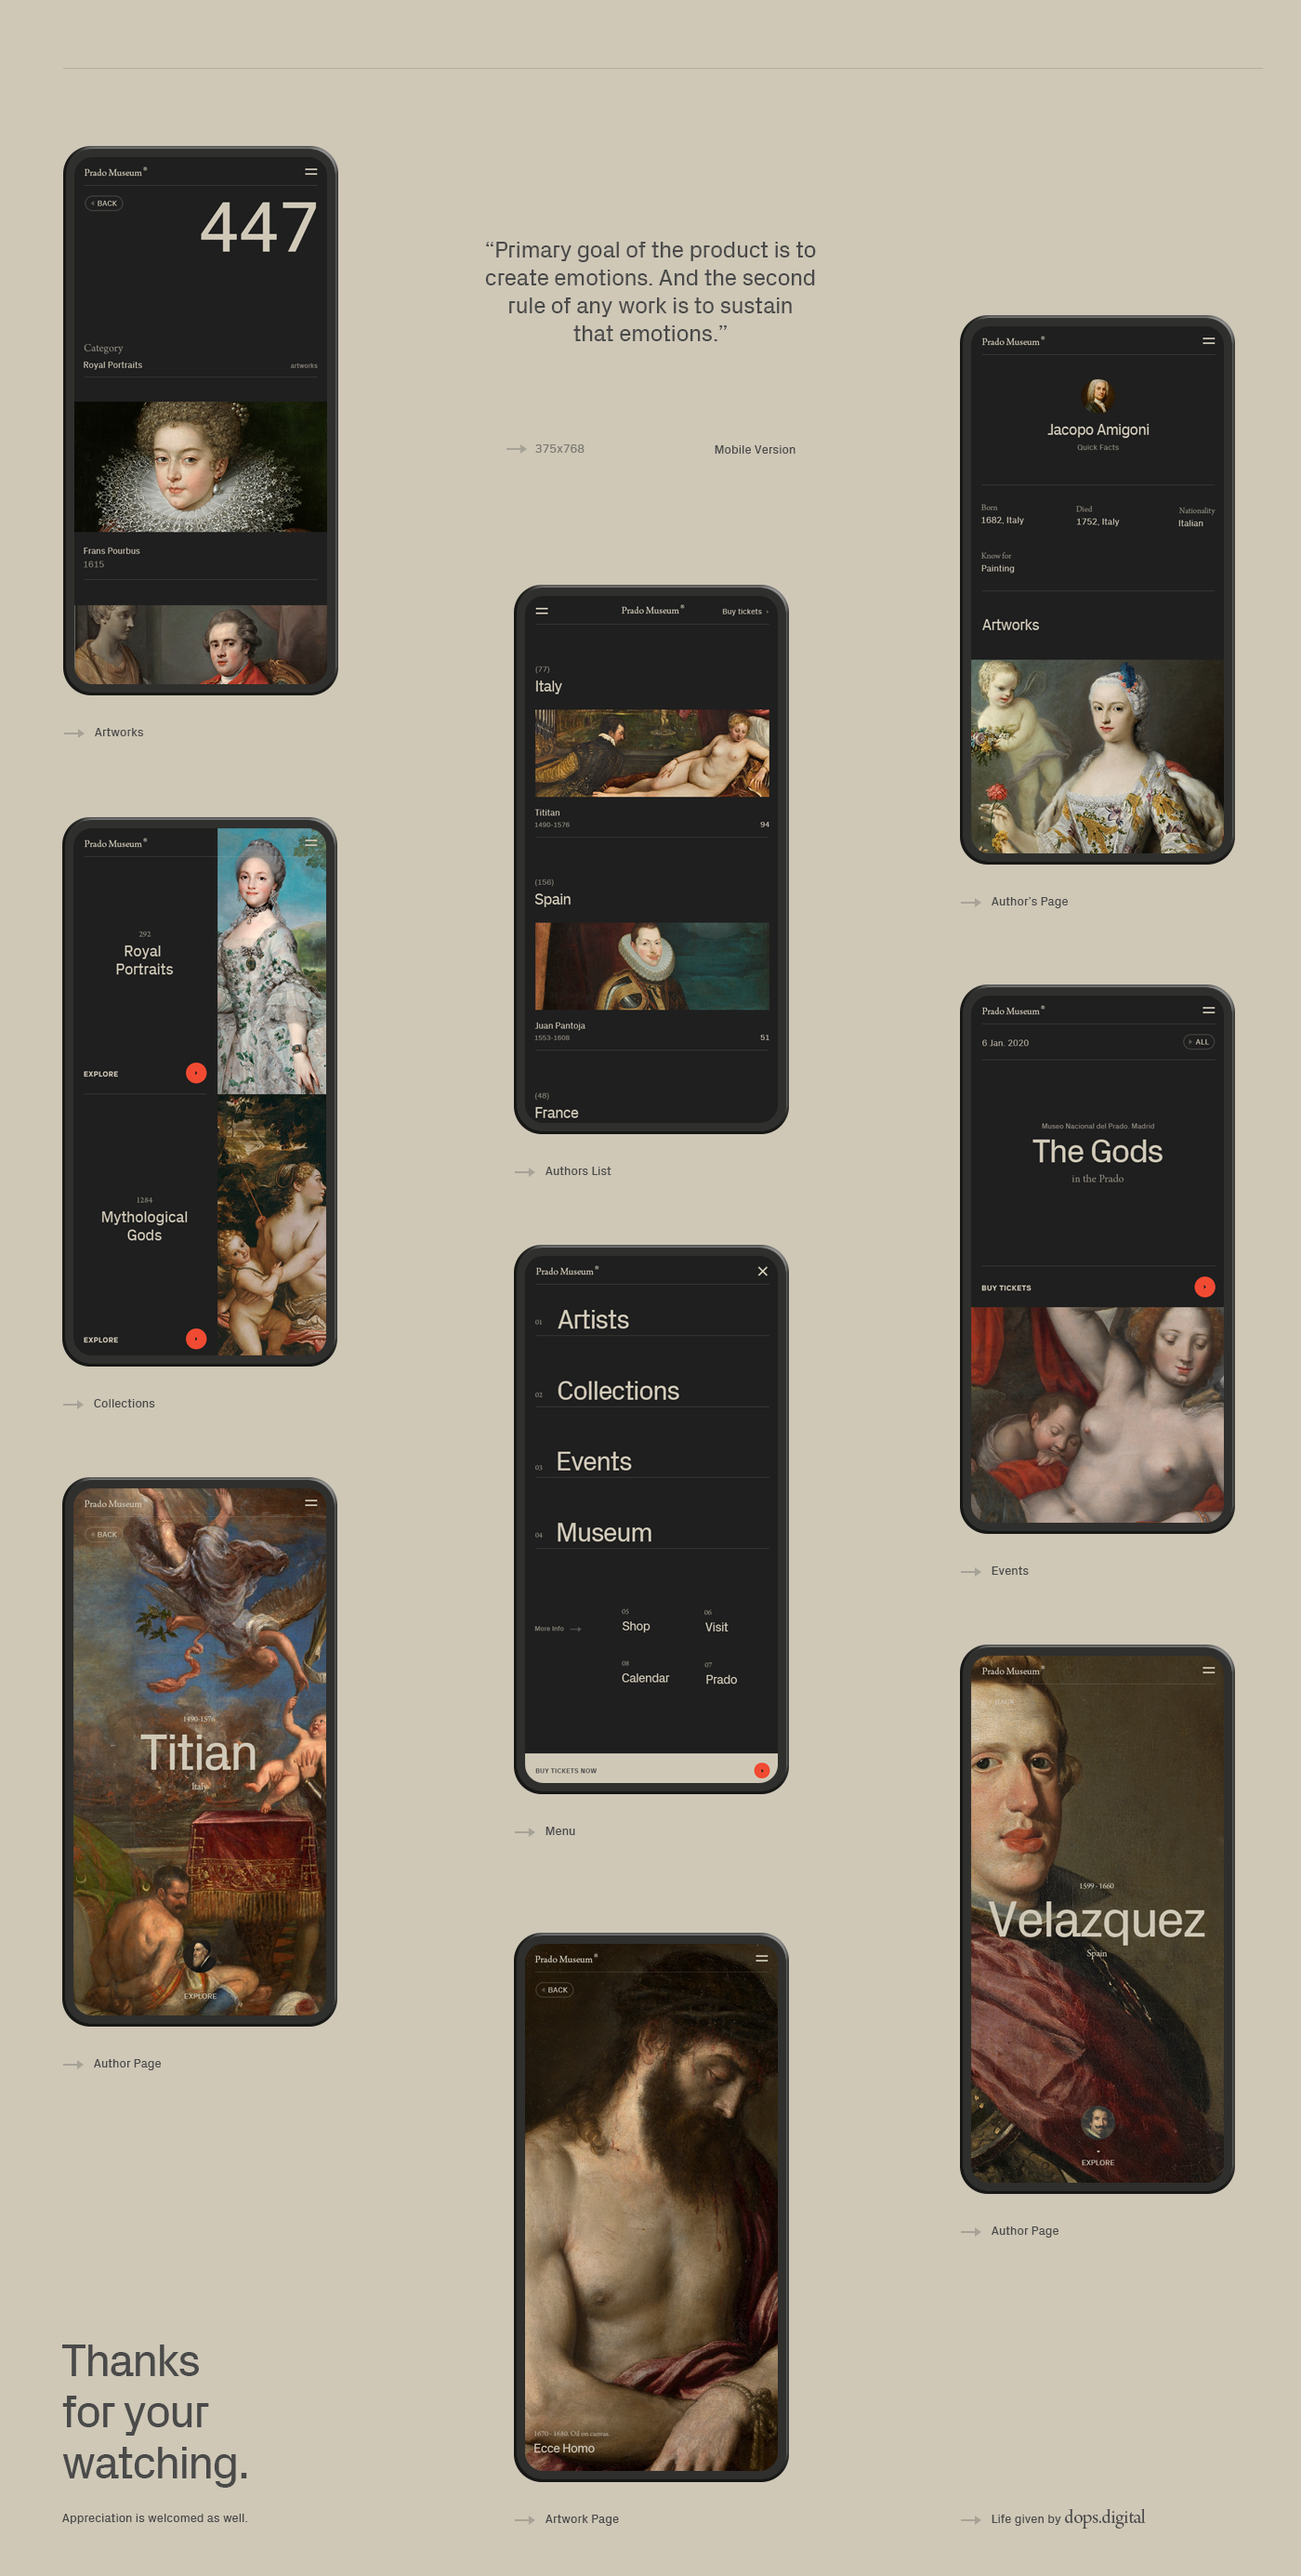 Prado Museum Website with Virtual Reality Experience on Behancea8c4e373878699.5c1a4dda69ae3.png